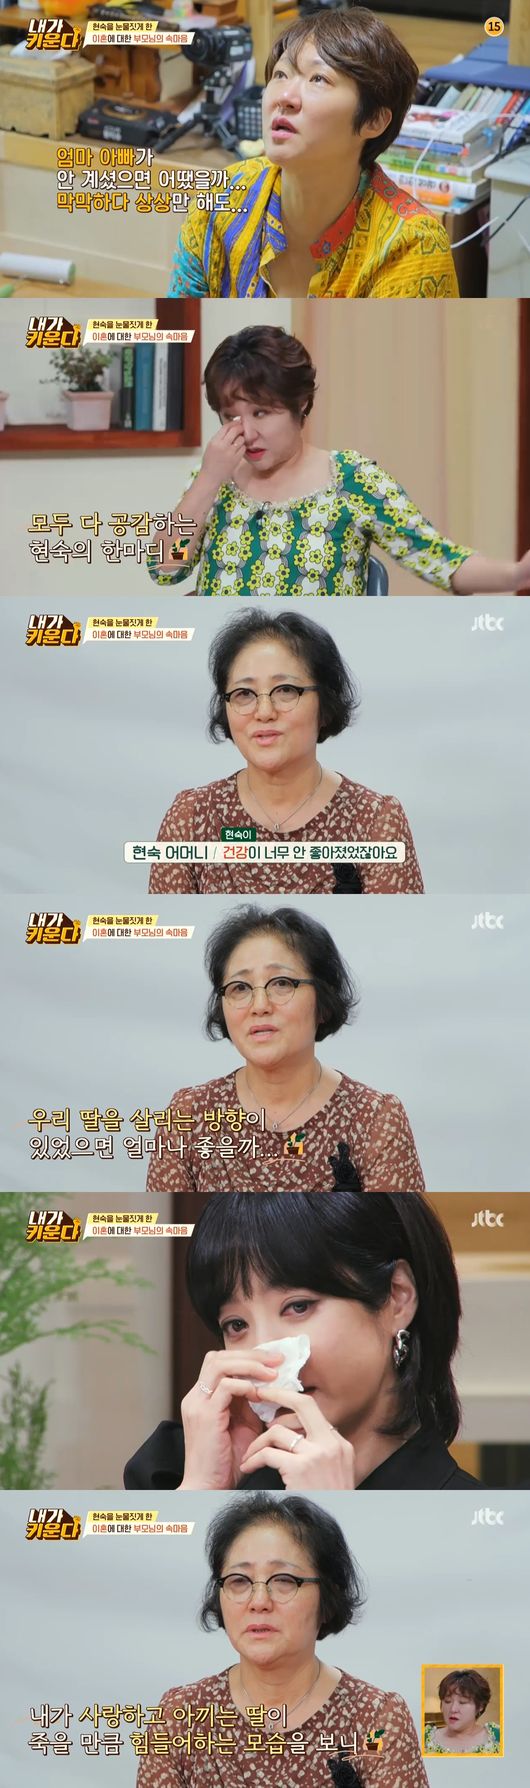 Kim Hyun-Sook, Jo Yoon-hee, Chae Rim and Kim Na-young have spoken out about their ideas about divorce.On the 23rd, JTBC I Raise, Jo Yoon-hee told his thoughts about his divorce while his parents feelings about Kim Hyun-Sooks divorce were revealed.On this day, Kim Hyun-Sook brought out his parents story about his divorce.Kim Hyun-Sook said: Father is so wide and you cant be too hard to come here when youre at your disposal.But he told me that you and Hamin would have a good meaning for coming here. Kim Hyun-Sook said: I got married and had a child and had my family and it seemed like it was too damaging for my mum Father.So I try to do well, but I have my feelings, so I have to do my best to take responsibility for childcare and I have an obsession rather than a hard body. Kim Hyun-Sooks mother told the production team through an interview: My health has become so bad.So I thought how good it would be if there was a direction to save our daughter. My mother said, My mission as a wife and mother is good, but my daughter, who I love and care about, is so hard and hard to die.So I told him to do what you want if its hard enough for me to die, so I decided.Kim Hyun-Sooks father said: I told him Id try to fill in Fathers vacancy if possible.Kim Hyun-Sook, who watched the video, also showed tears; Kim Hyun-Sook said, I tried not to cry.Chae Rim laughed, saying, How did you not cry after taking this picture?Jo Yoon-hee said, I had a lot of thoughts and cried until last year, and I tried to shake it as much as possible. I think these processes are the process to meet Roa.I try to be brave when I think about it. I can endure any hard work if I think about it. Kim Hyun-Sook said, The child liked math, arithmetic. Hamin made Gugudan a surprise by memorizing him.Kim Na-young said, Hamin has a reversal charm. Kim Hyun-Sook said, I sent it to Milyang and one day I was remembering Gugudan.My mother has an education channel on YouTube, and I think she told me that. Kim Hyun-Sook began to read books by playing a one-man multiplayer while putting Son Hamin to bed; Kim Na-young said, That book should be removed.It is too long, said Kim Hyun-Sook, who was more excited and read the book hard and laughed.I was immersed in it, Kim Hyun-Sook said.But Hamin said he would jump up and take a shower, with Kim Hyun-Sook laughing, saying, I think Im holding it because its my child, if it was a brother or a husband.Kim Hyun-Sook said, It is always difficult not only today but also today. Child care is not a meat loss. I want to fill it without shortage, but there will be a shortage.That part will try to make me work harder, he said.